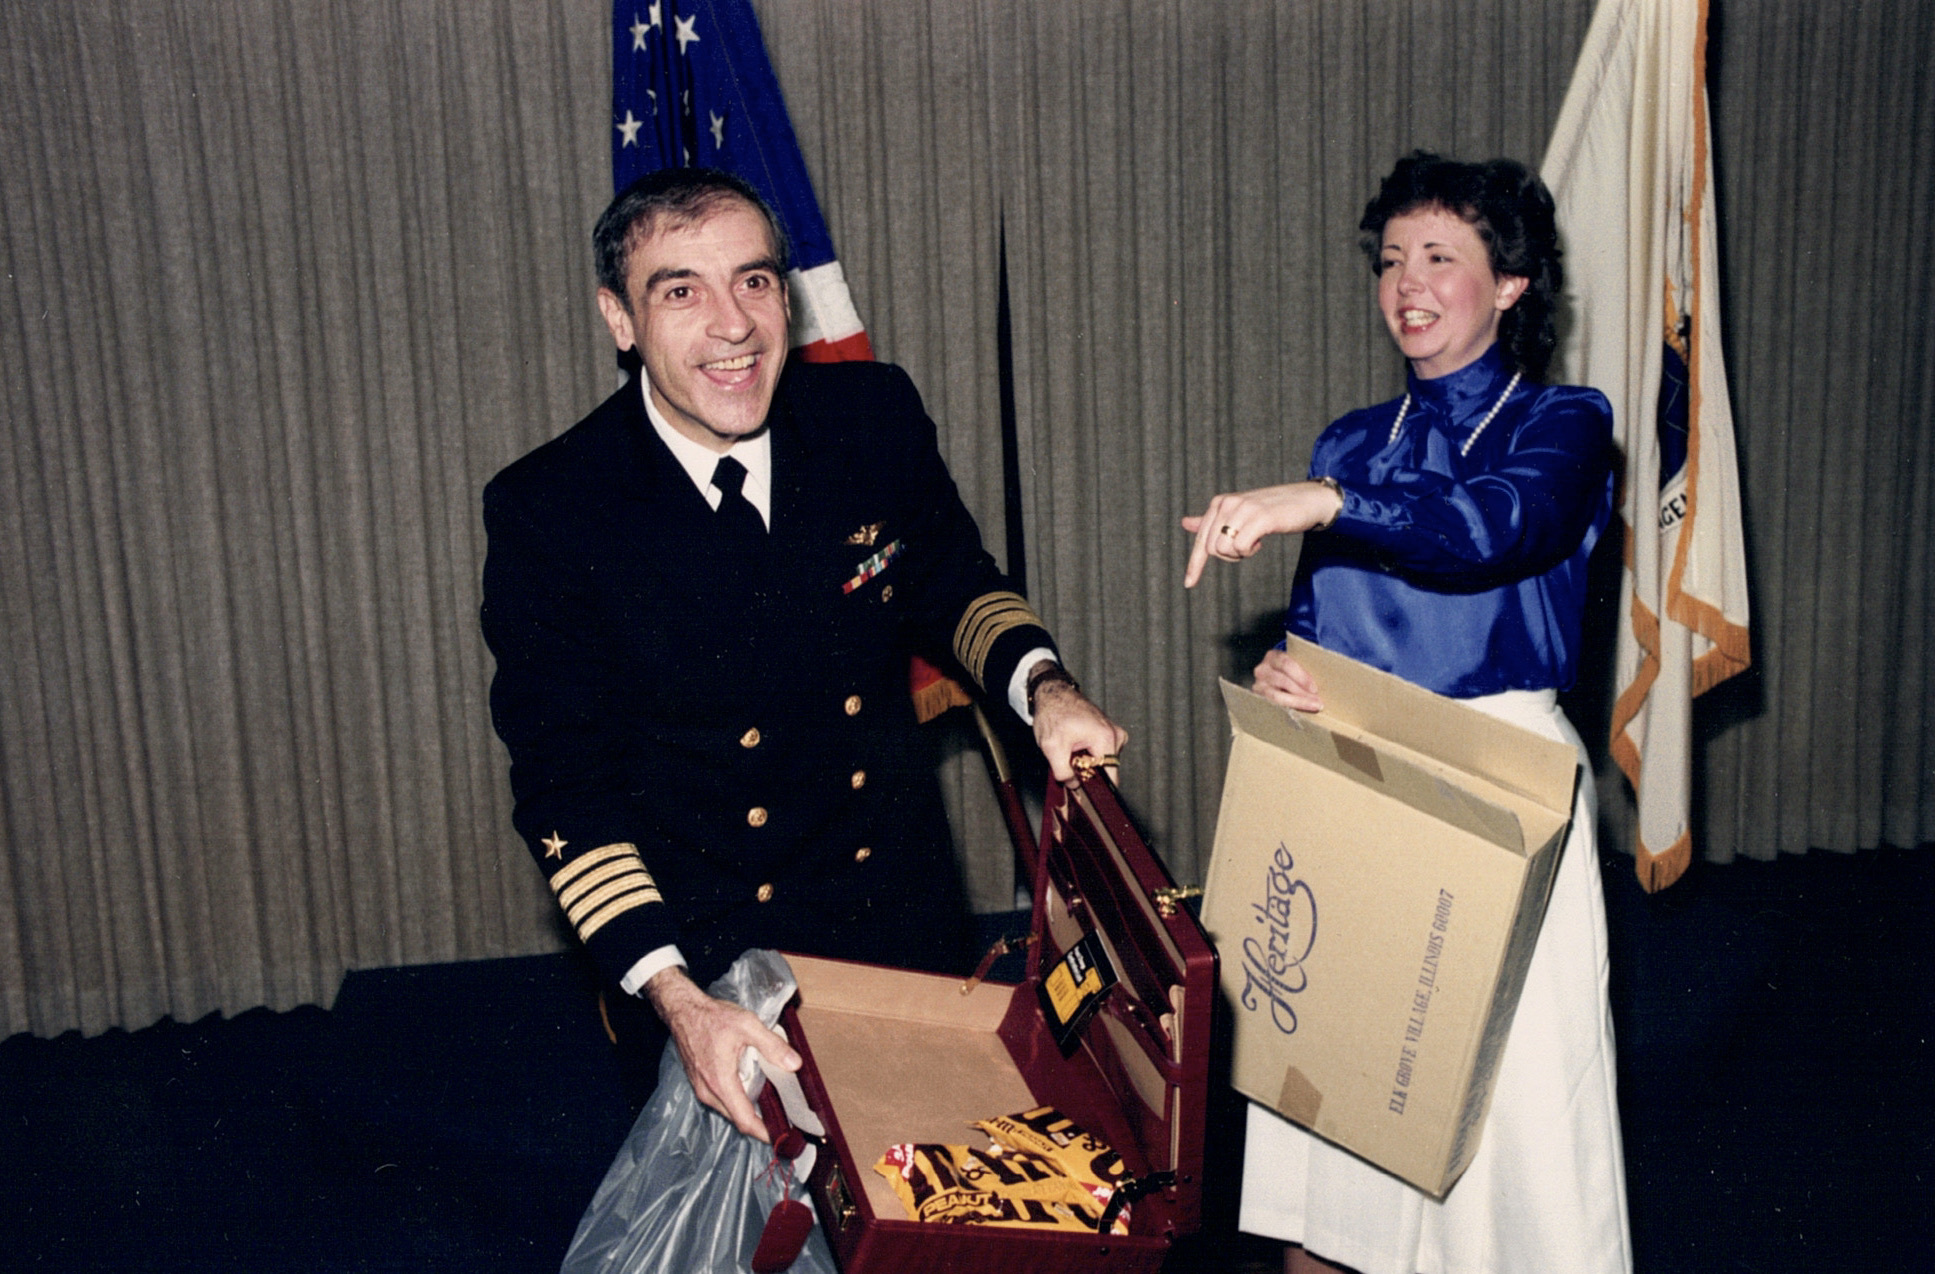 Petrucci receives a gift of his favorite candy, peanut M&Ms, as he retires in 1986. (Courtesy photo)